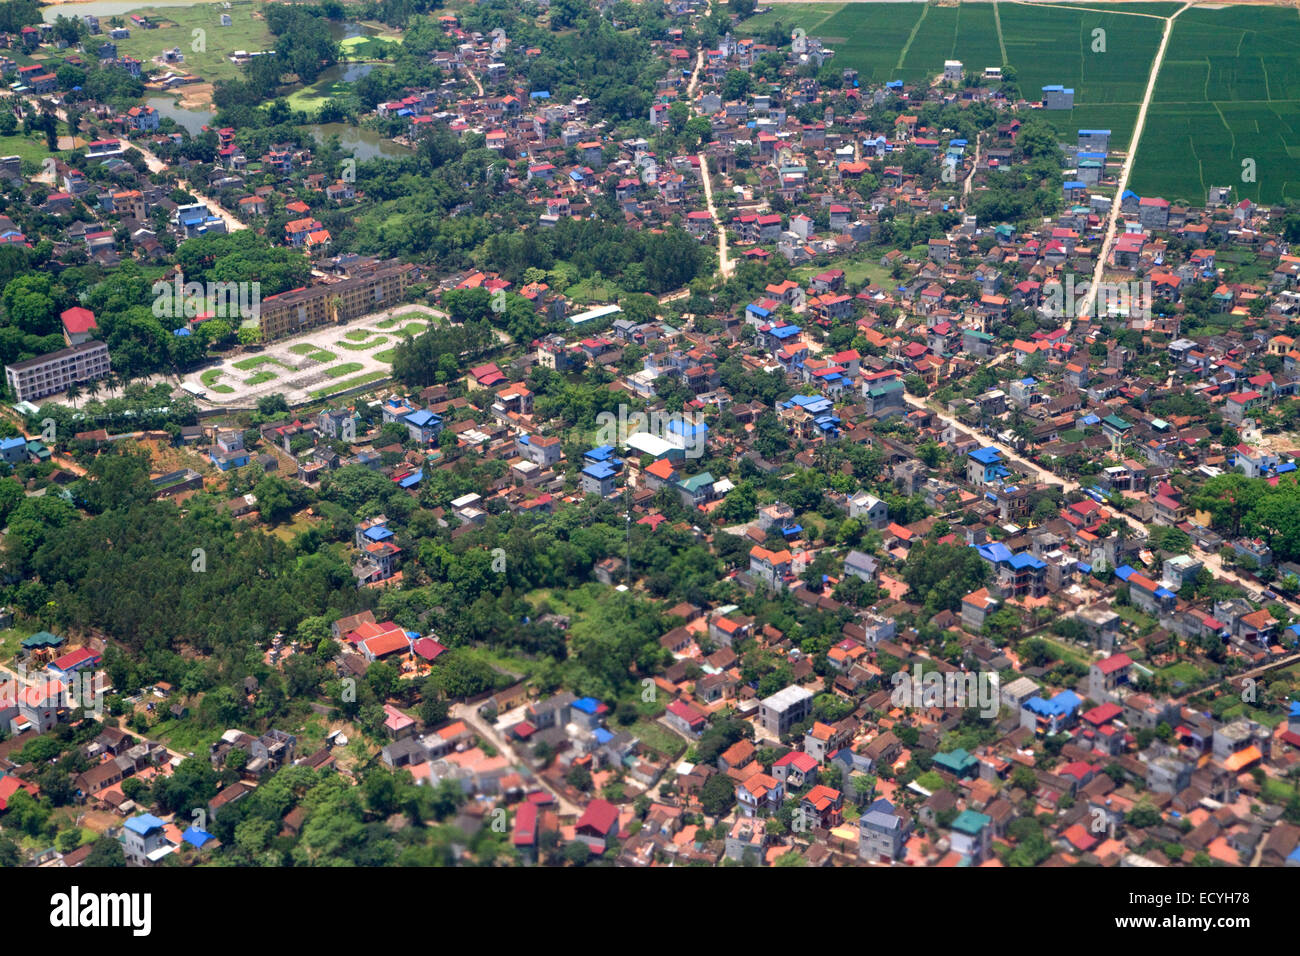 Aerial view of the countryside and housing near Hanoi, Vietnam. Stock Photo